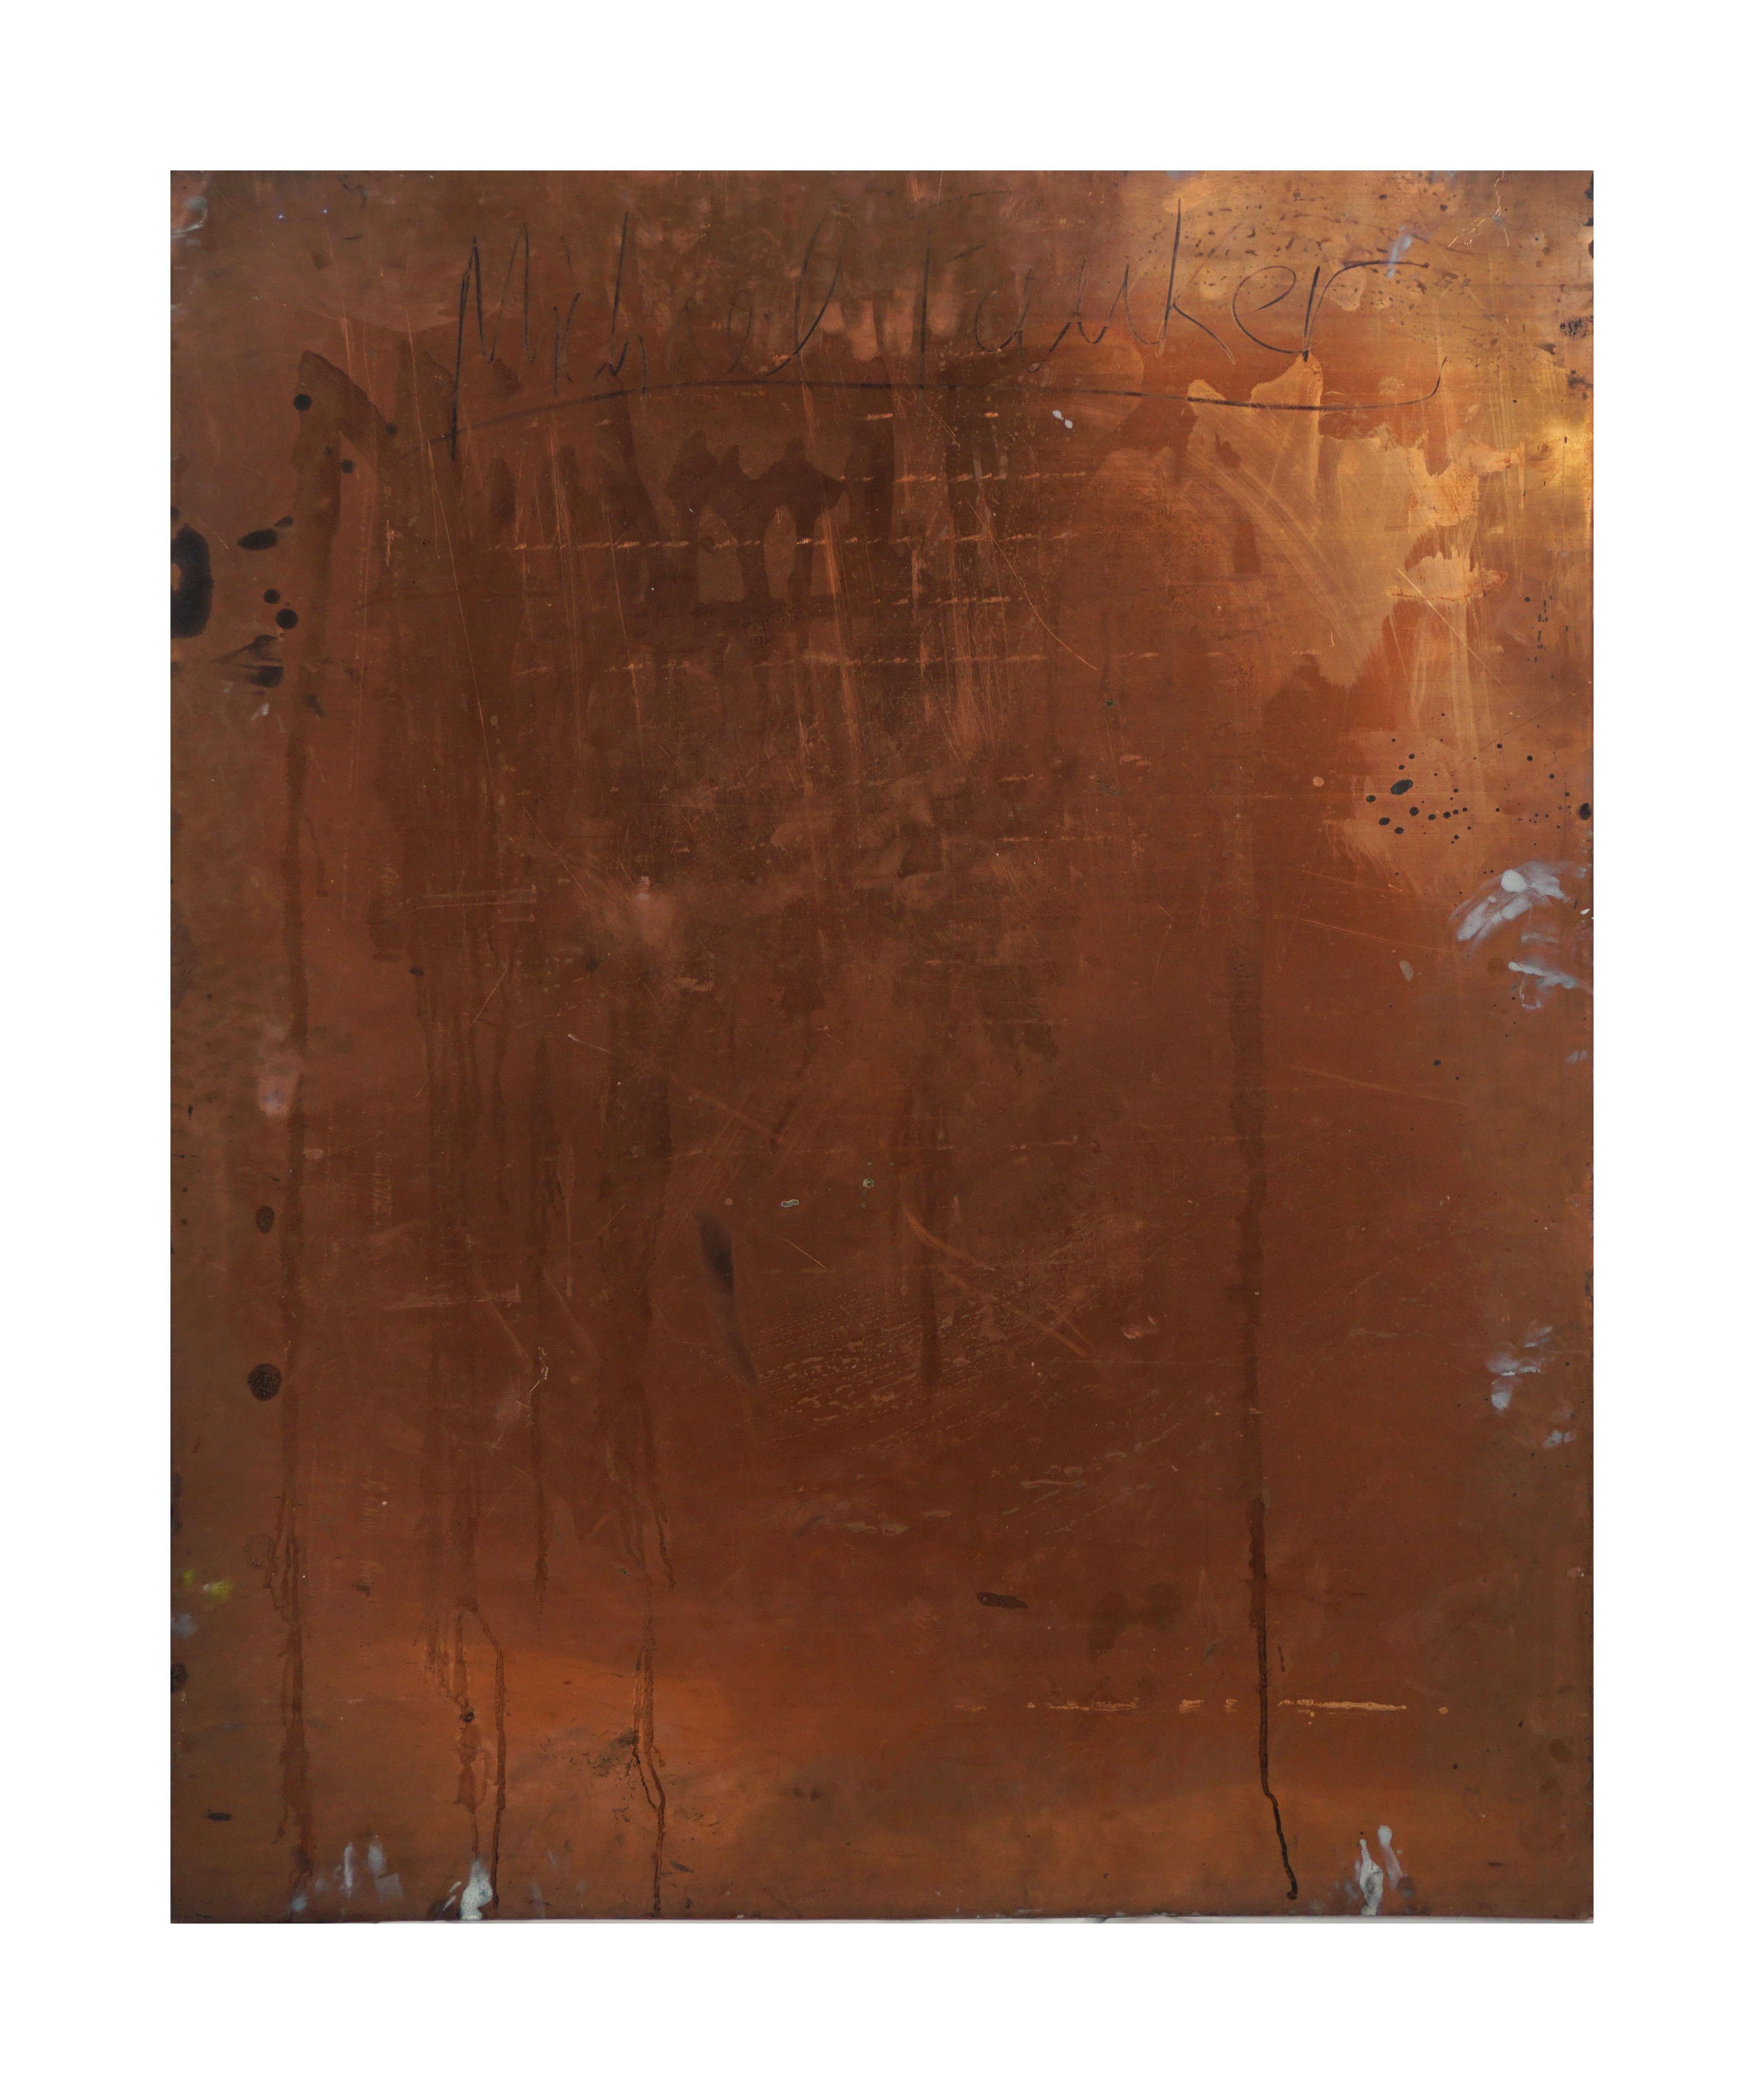 Calligraphy Web Abstract on Reclaimed Copper - Black Abstract Painting by Michael Pauker 